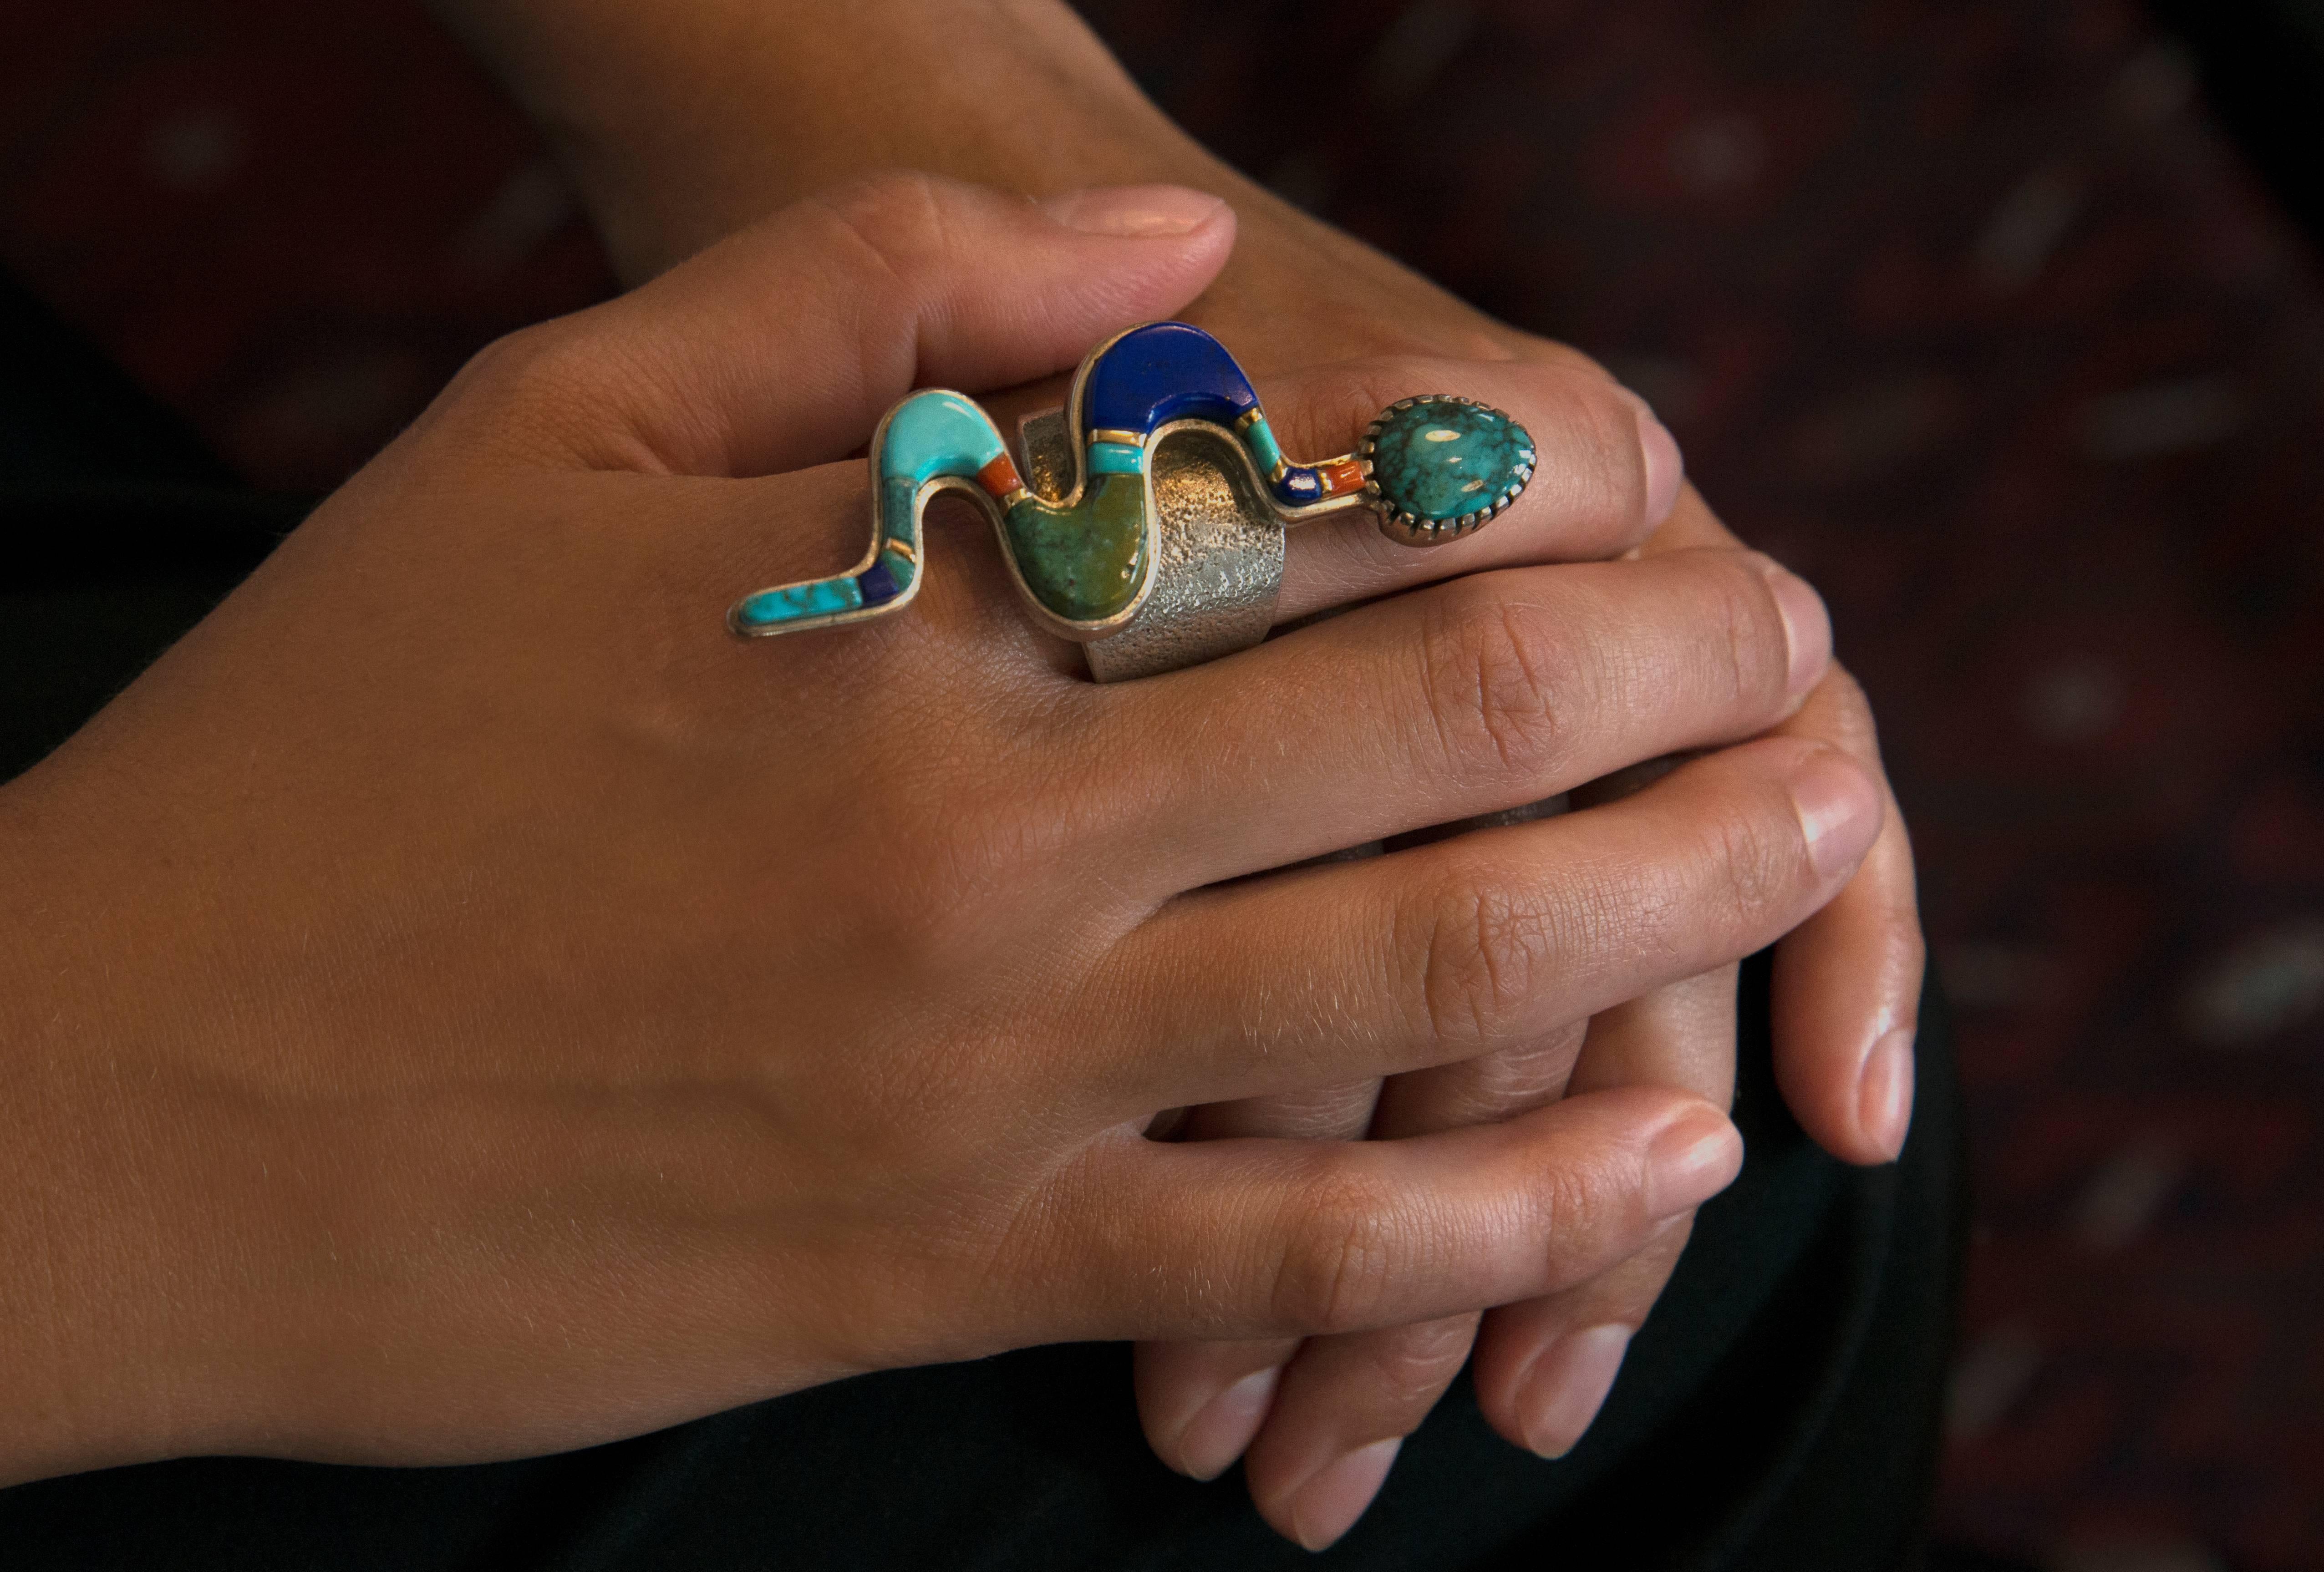 A silver, tufa-cast snake ring with inlaid turquoise, lapis lazuli, coral and six 18k gold spacers, by Verma Nequetewa, SONWAI, 2013. Size 11 1/2. 

This ring looks most striking on the middle finger. It also can be sized.